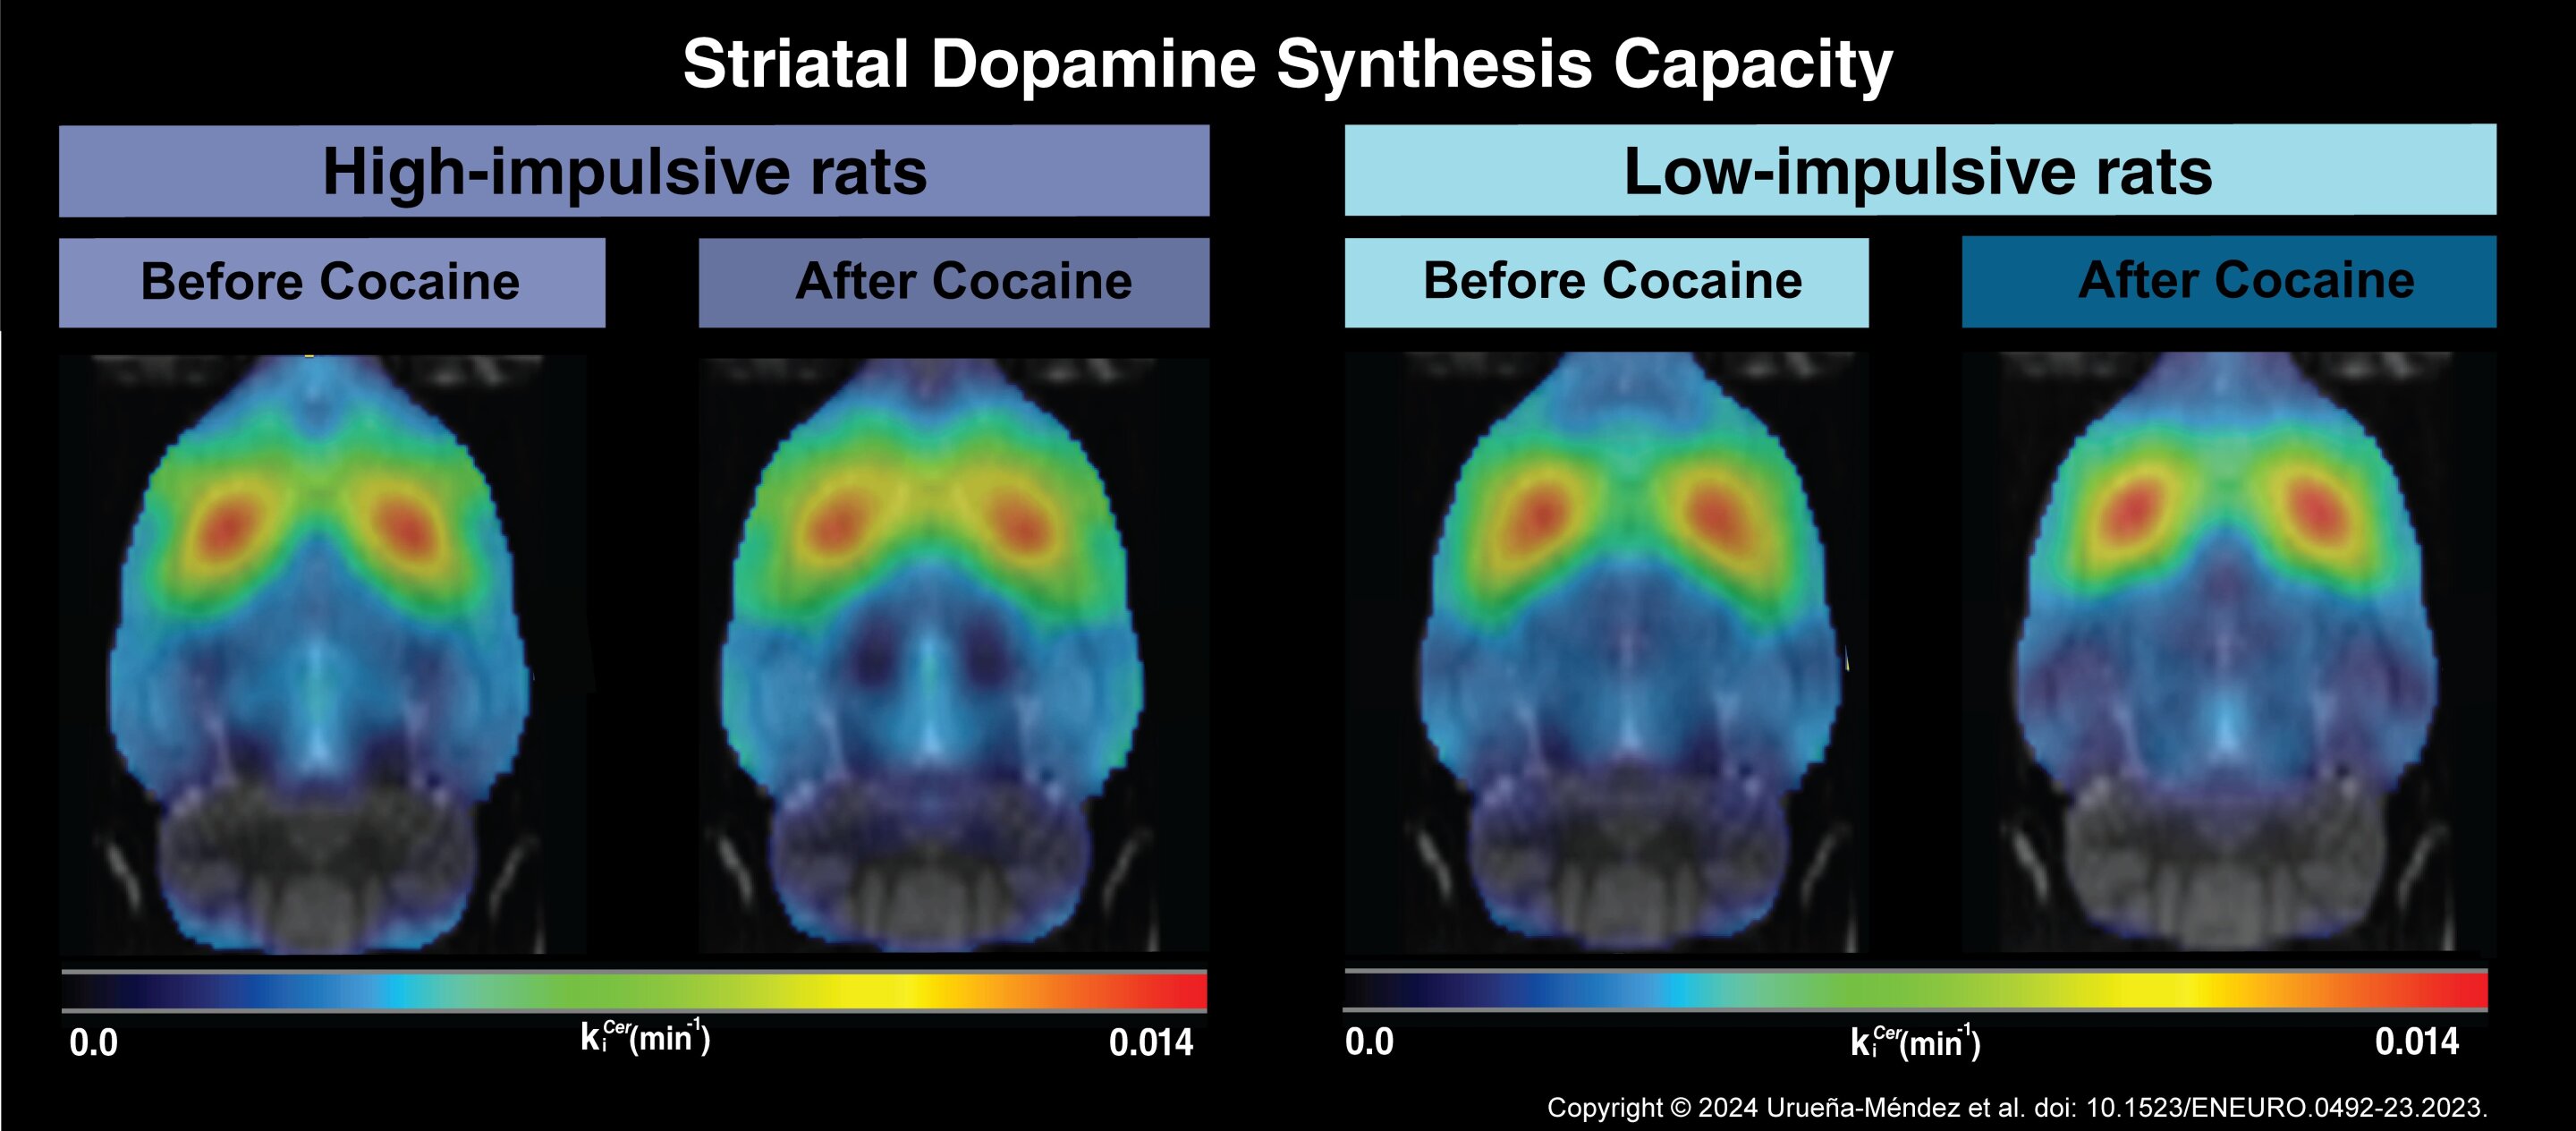 #Dopamine production is not behind vulnerability to cocaine abuse